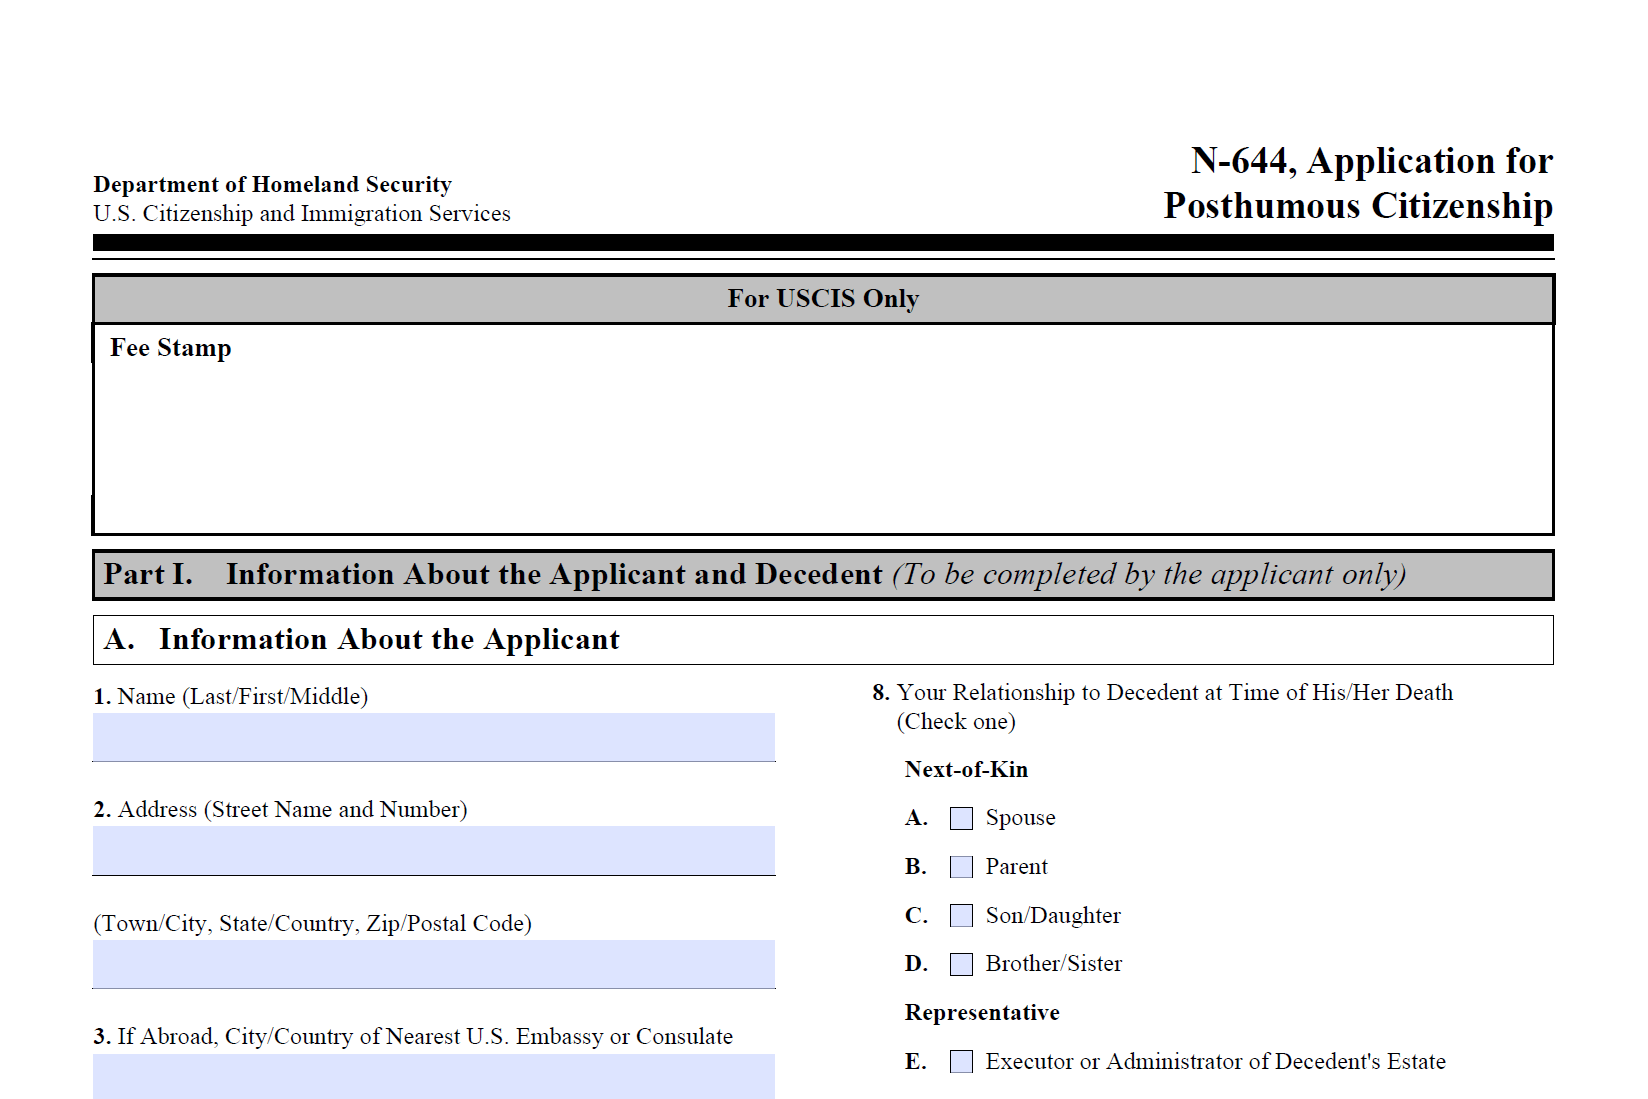 Form N-644: Application for Posthumous Citizenship